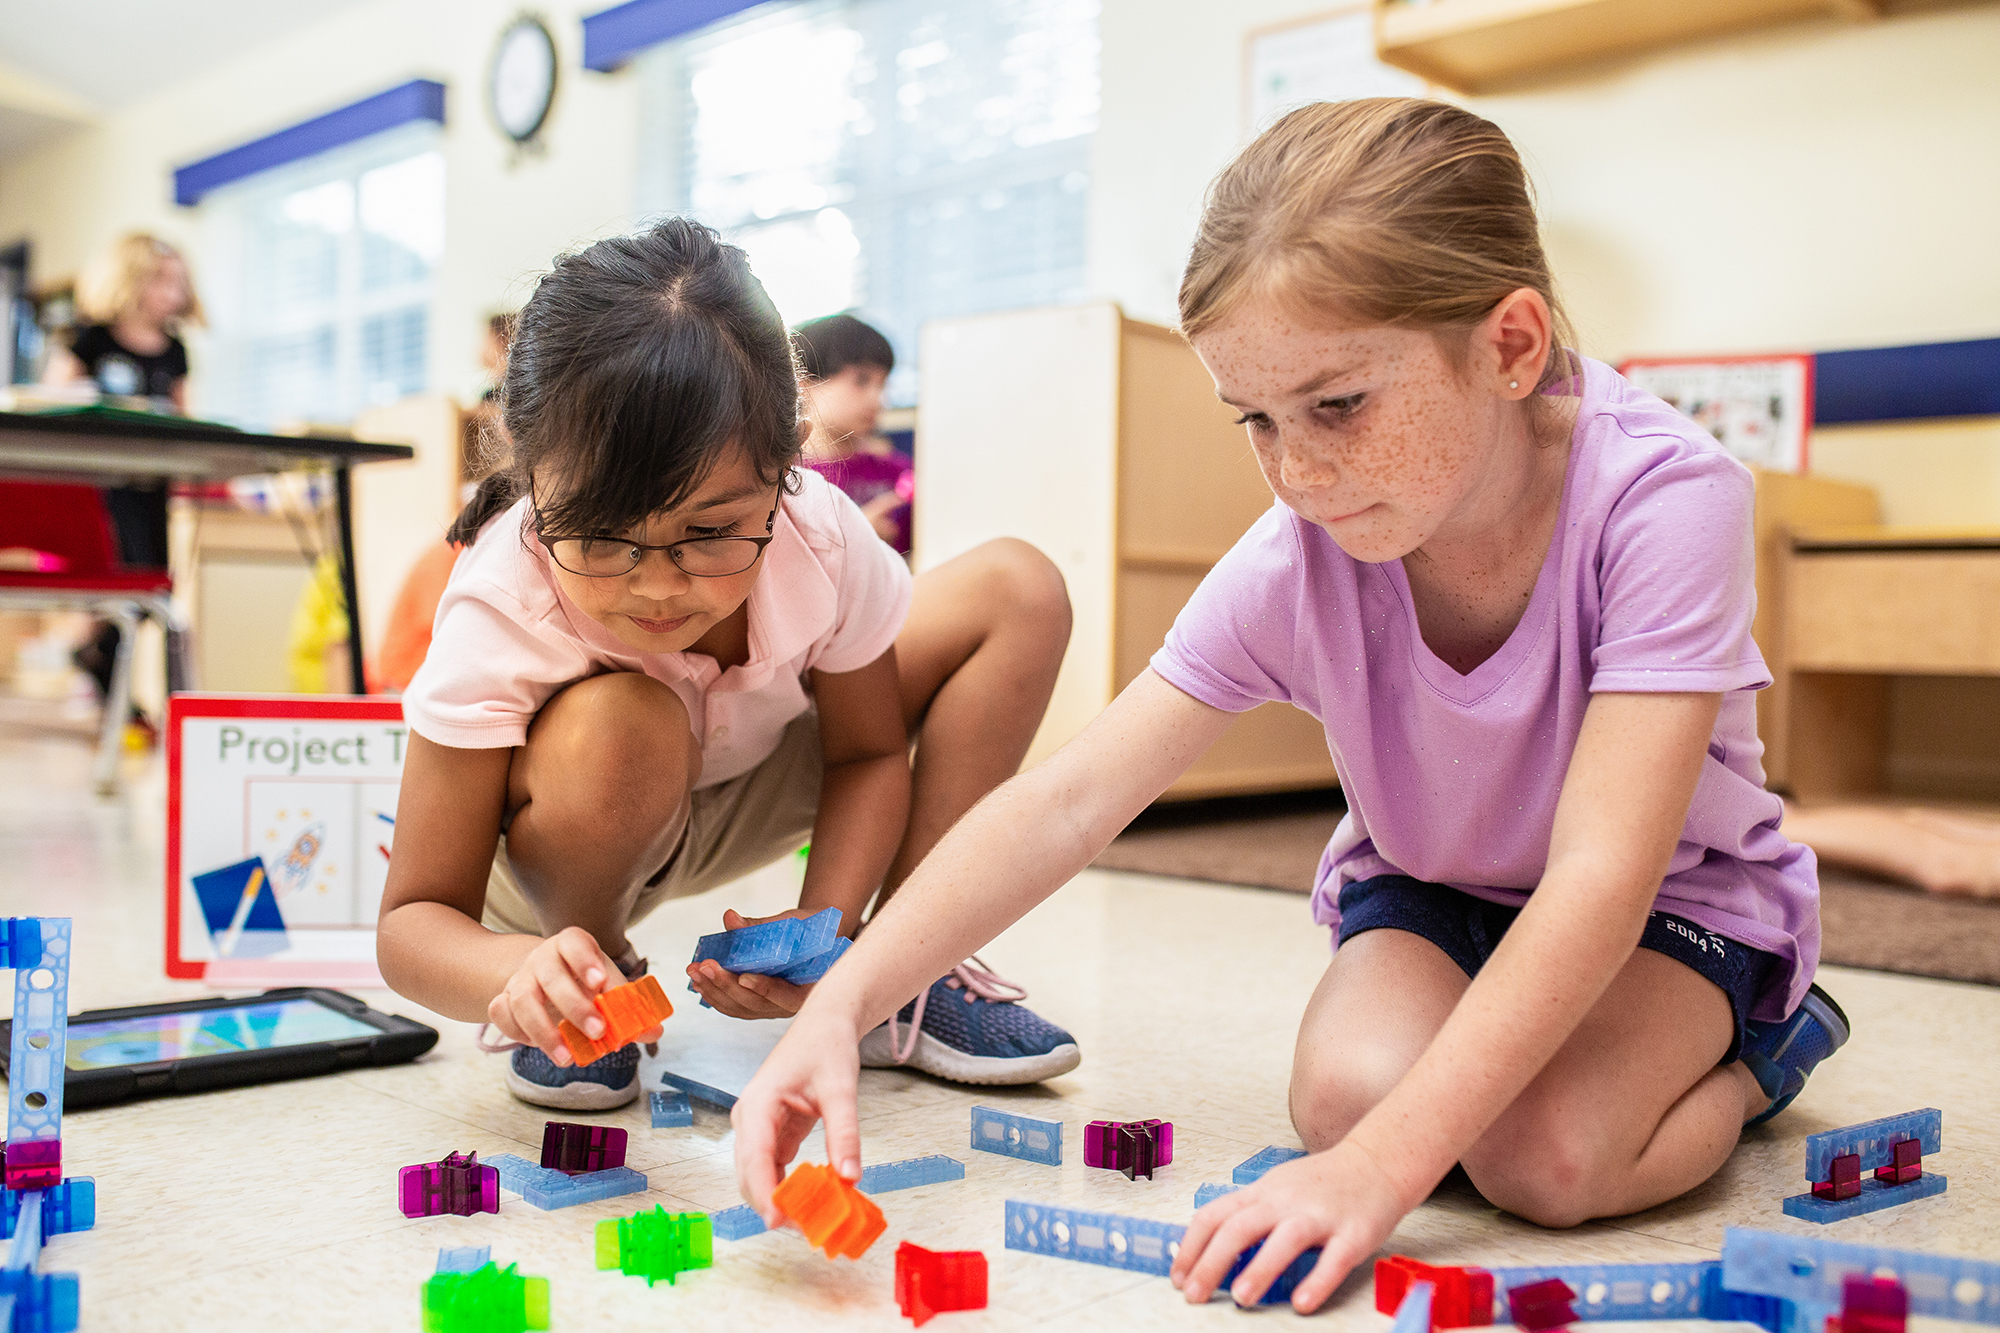 Students at the Primrose Schools Summer Adventure Club enjoy hands-on learning activities that inspire curiosity, creativity and enhance social-emotional competencies from a young age.